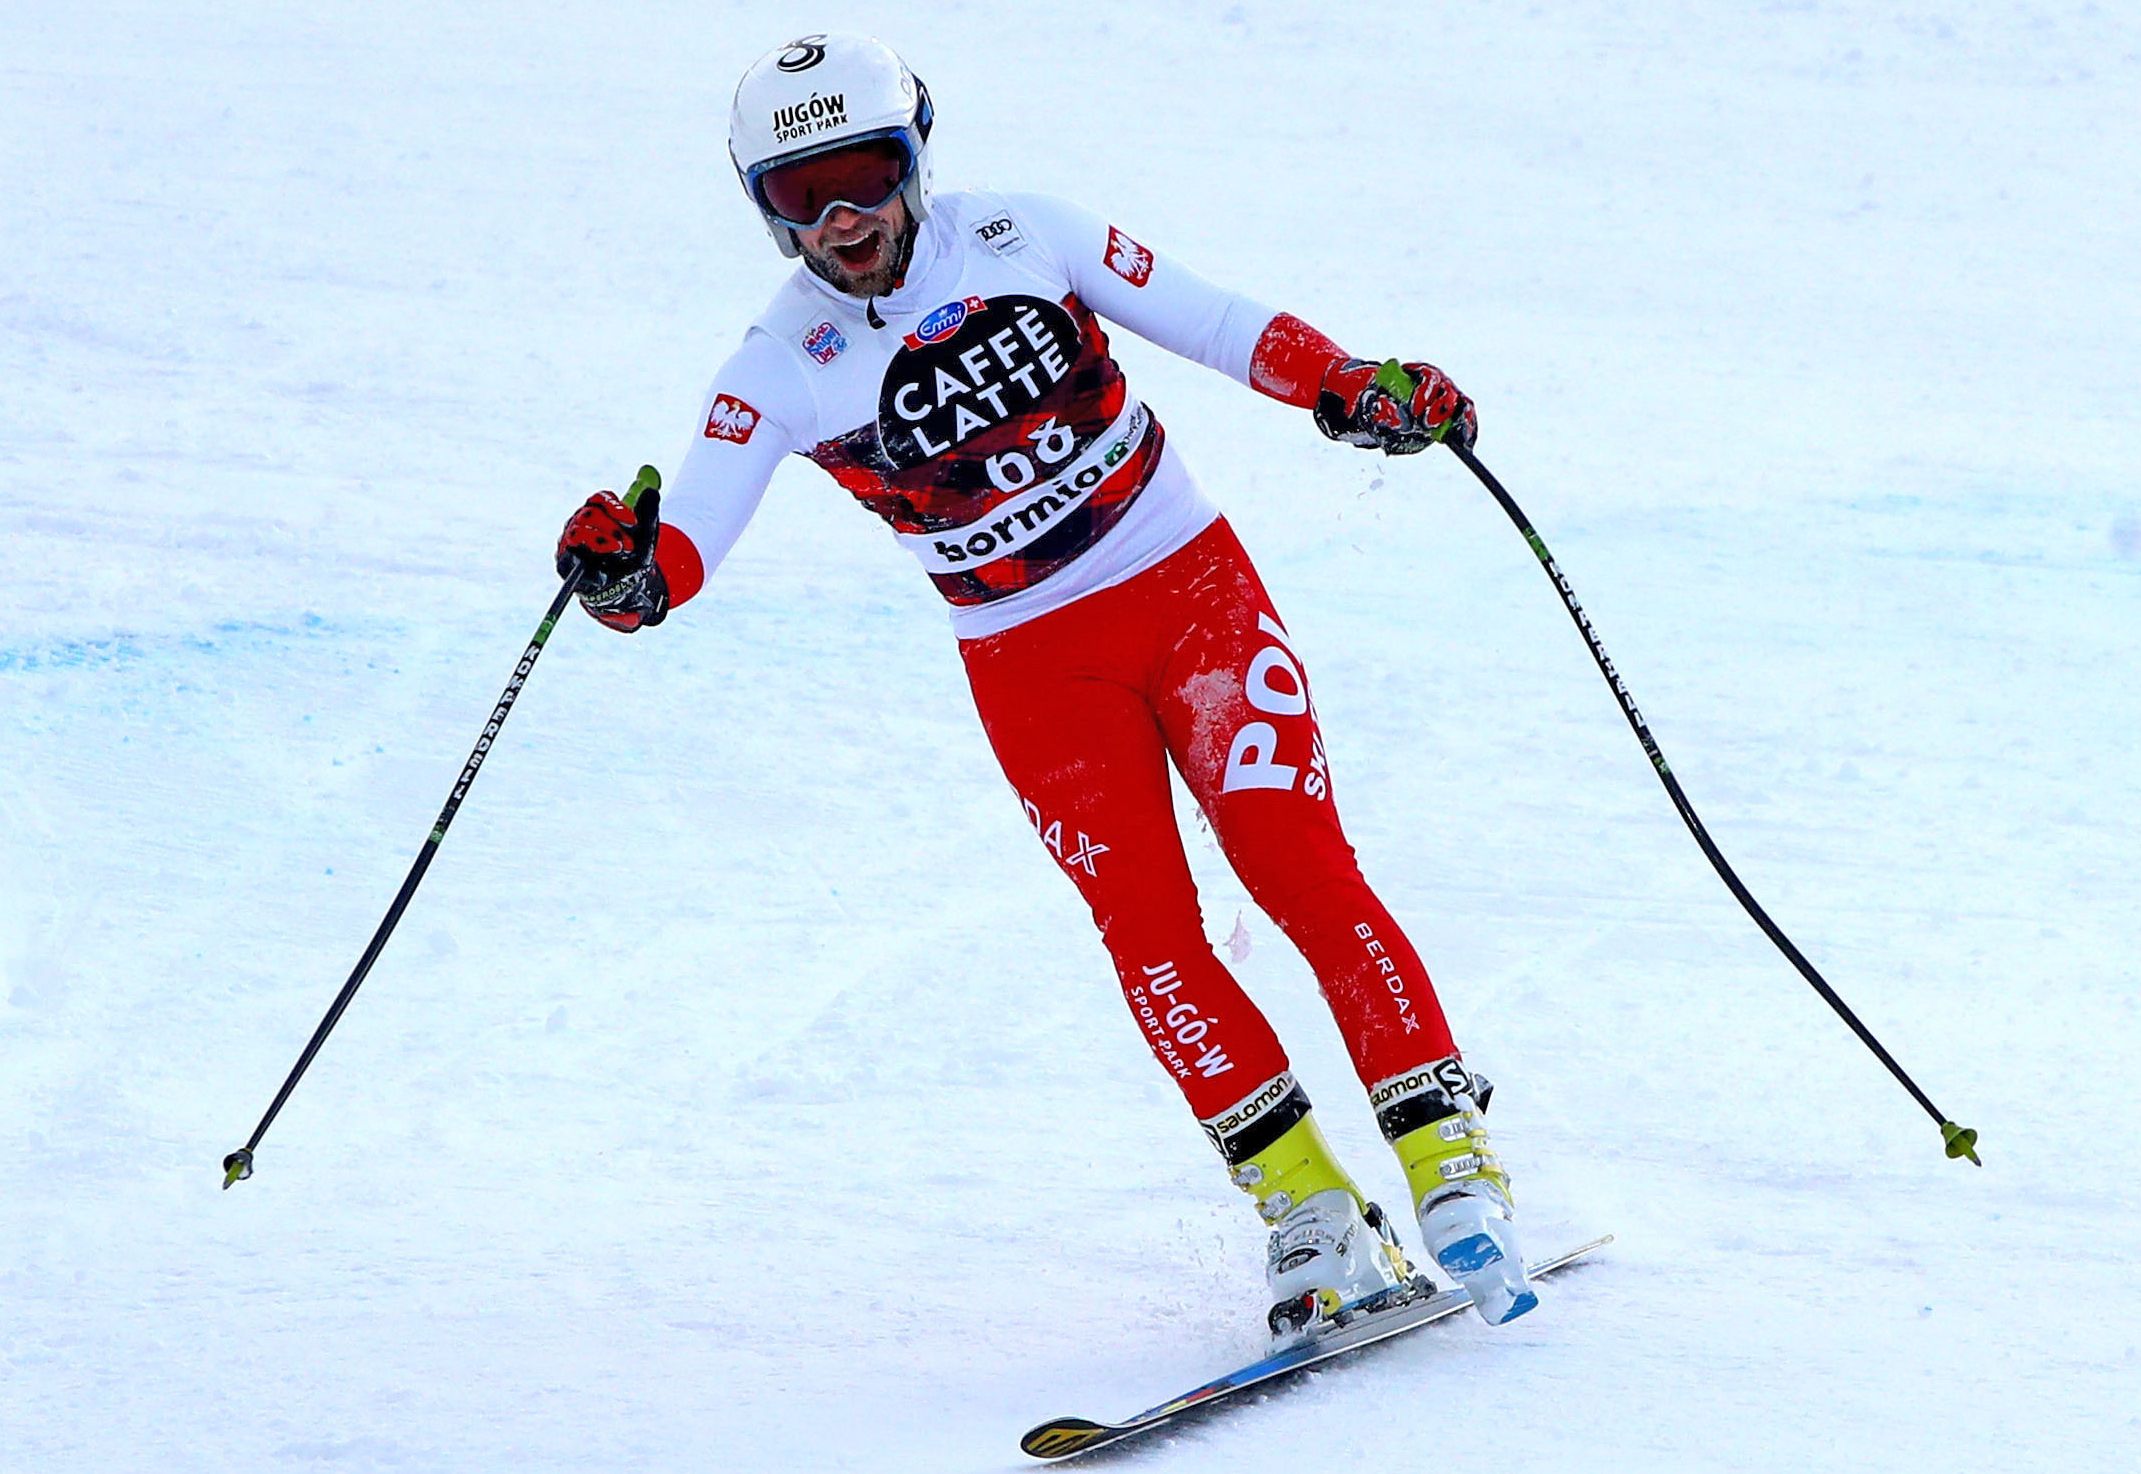 Downhill skier loses a ski and finishes the race anyway